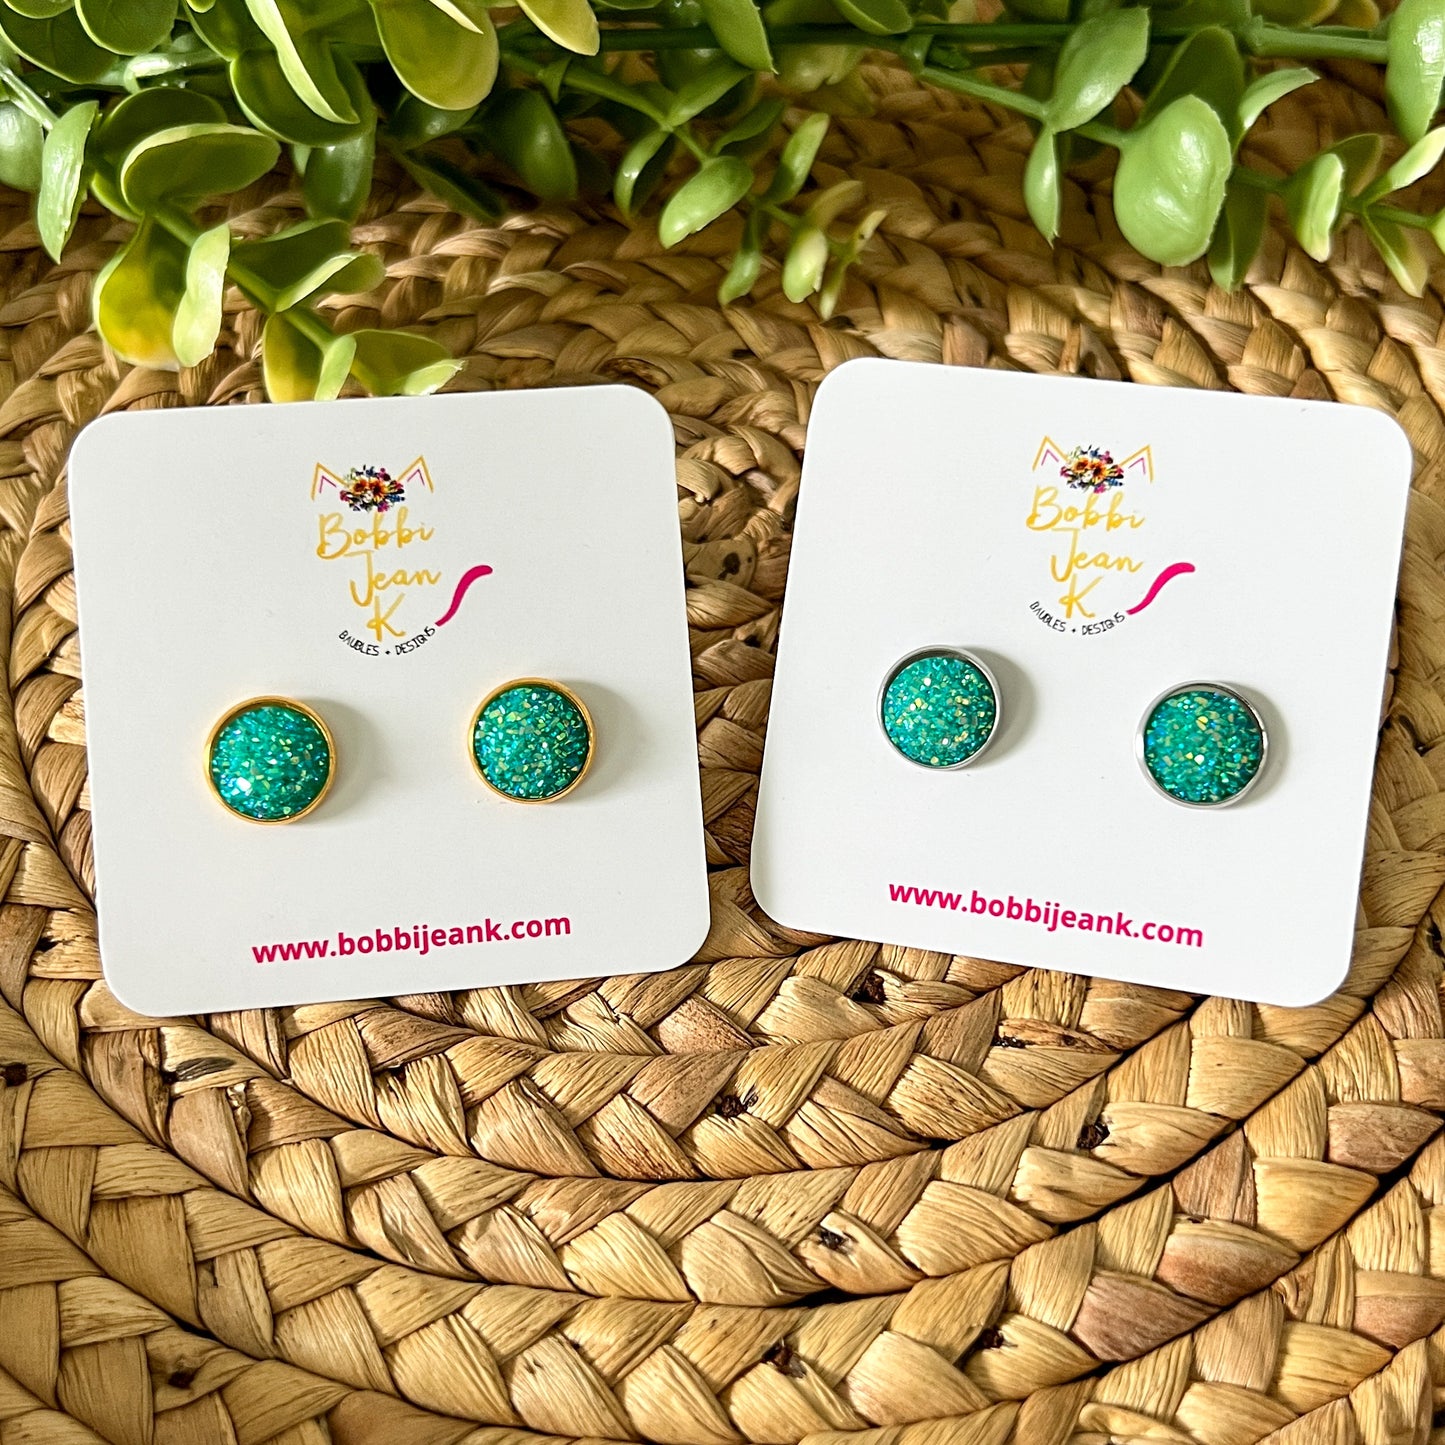 Aqua Sparkle Frosted Faux Druzy Studs 12mm: Choose Silver or Gold Settings